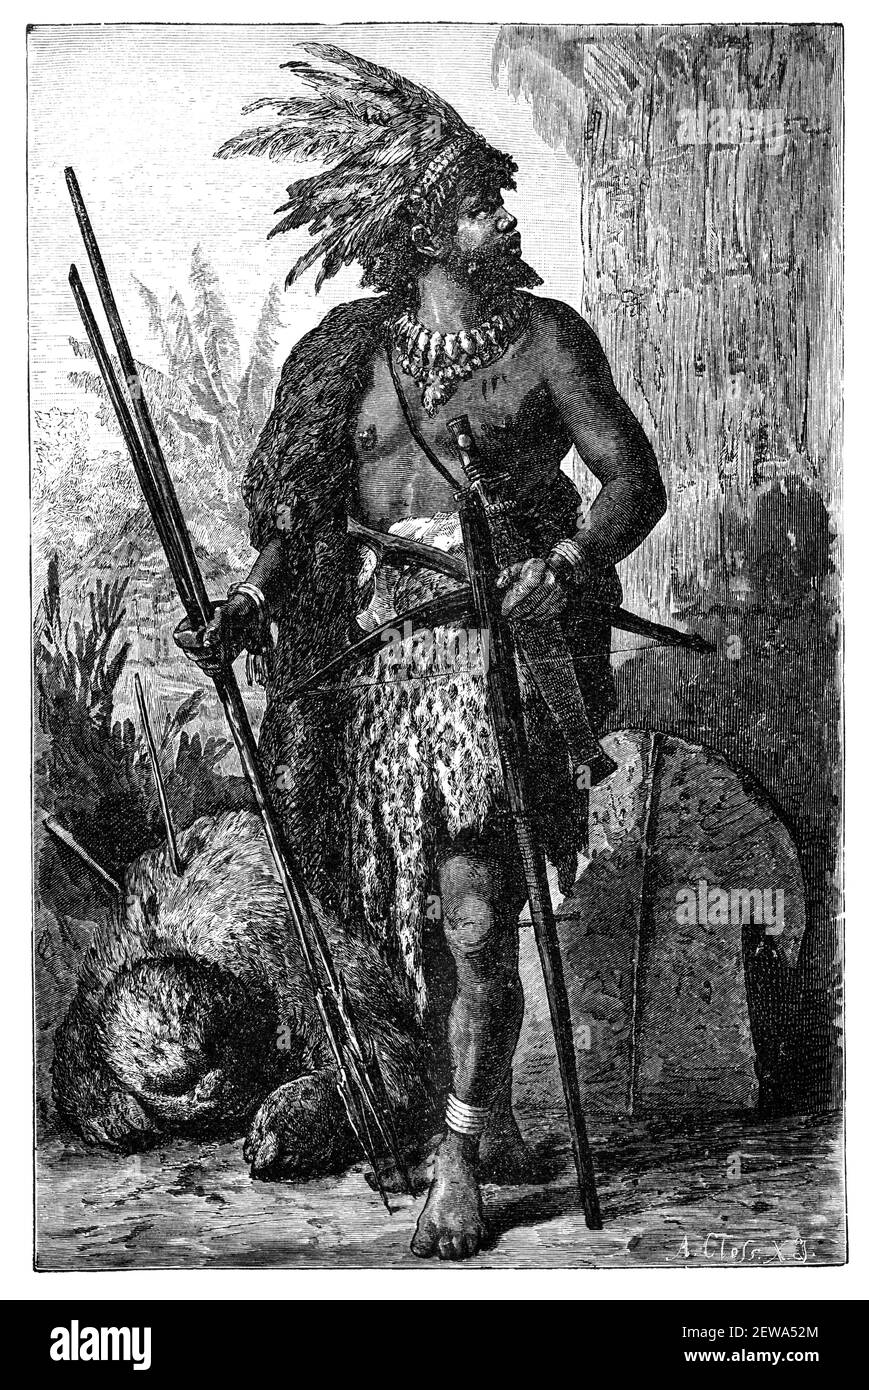 Chieftain or tribal chief with killed gorilla. Congo. Culture and history of Central Africa. Vintage antique black and white illustration. 19th century. Stock Photo